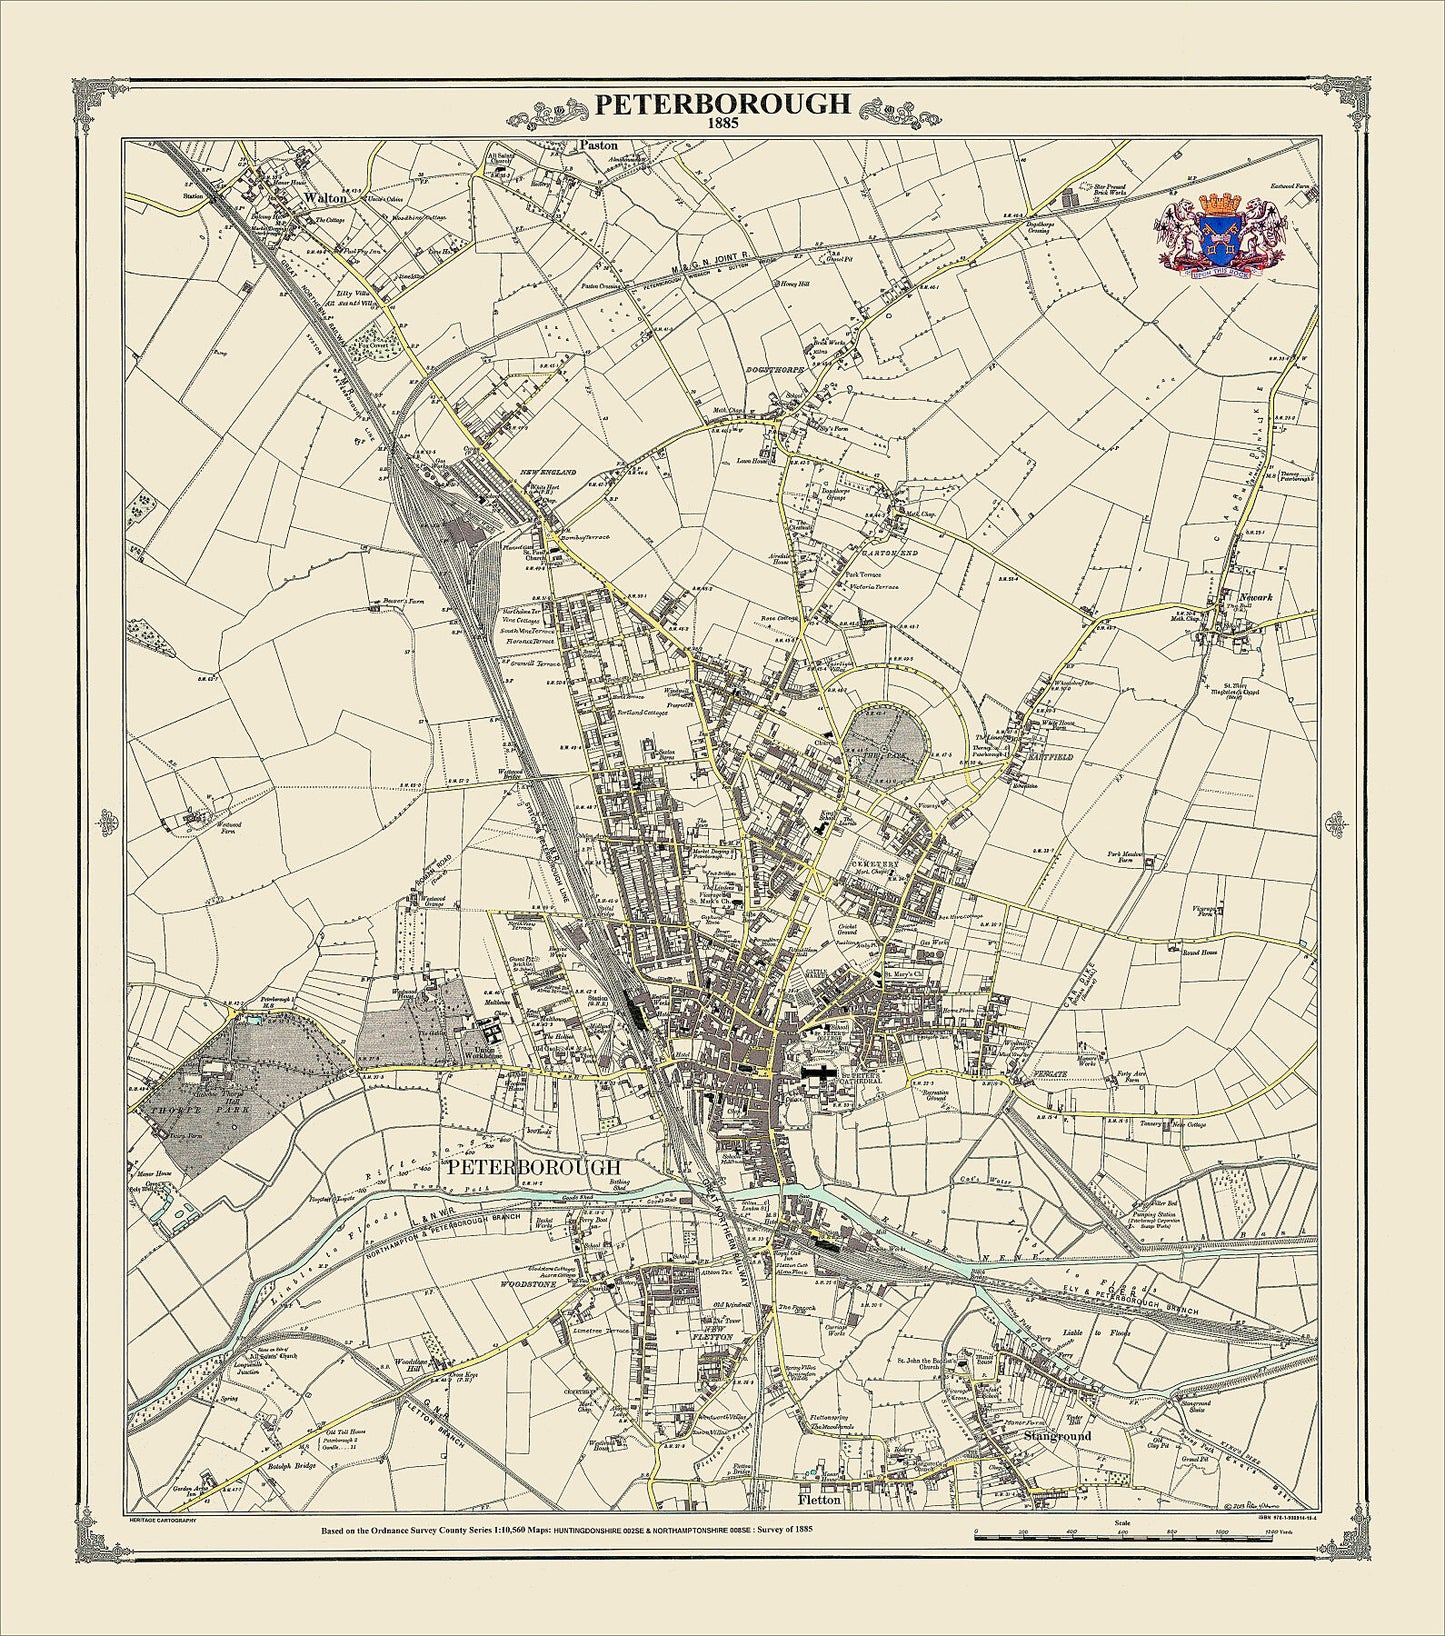 Coloured Victorian map of Peterborough in 1885 by Peter J Adams of Heritage Cartography